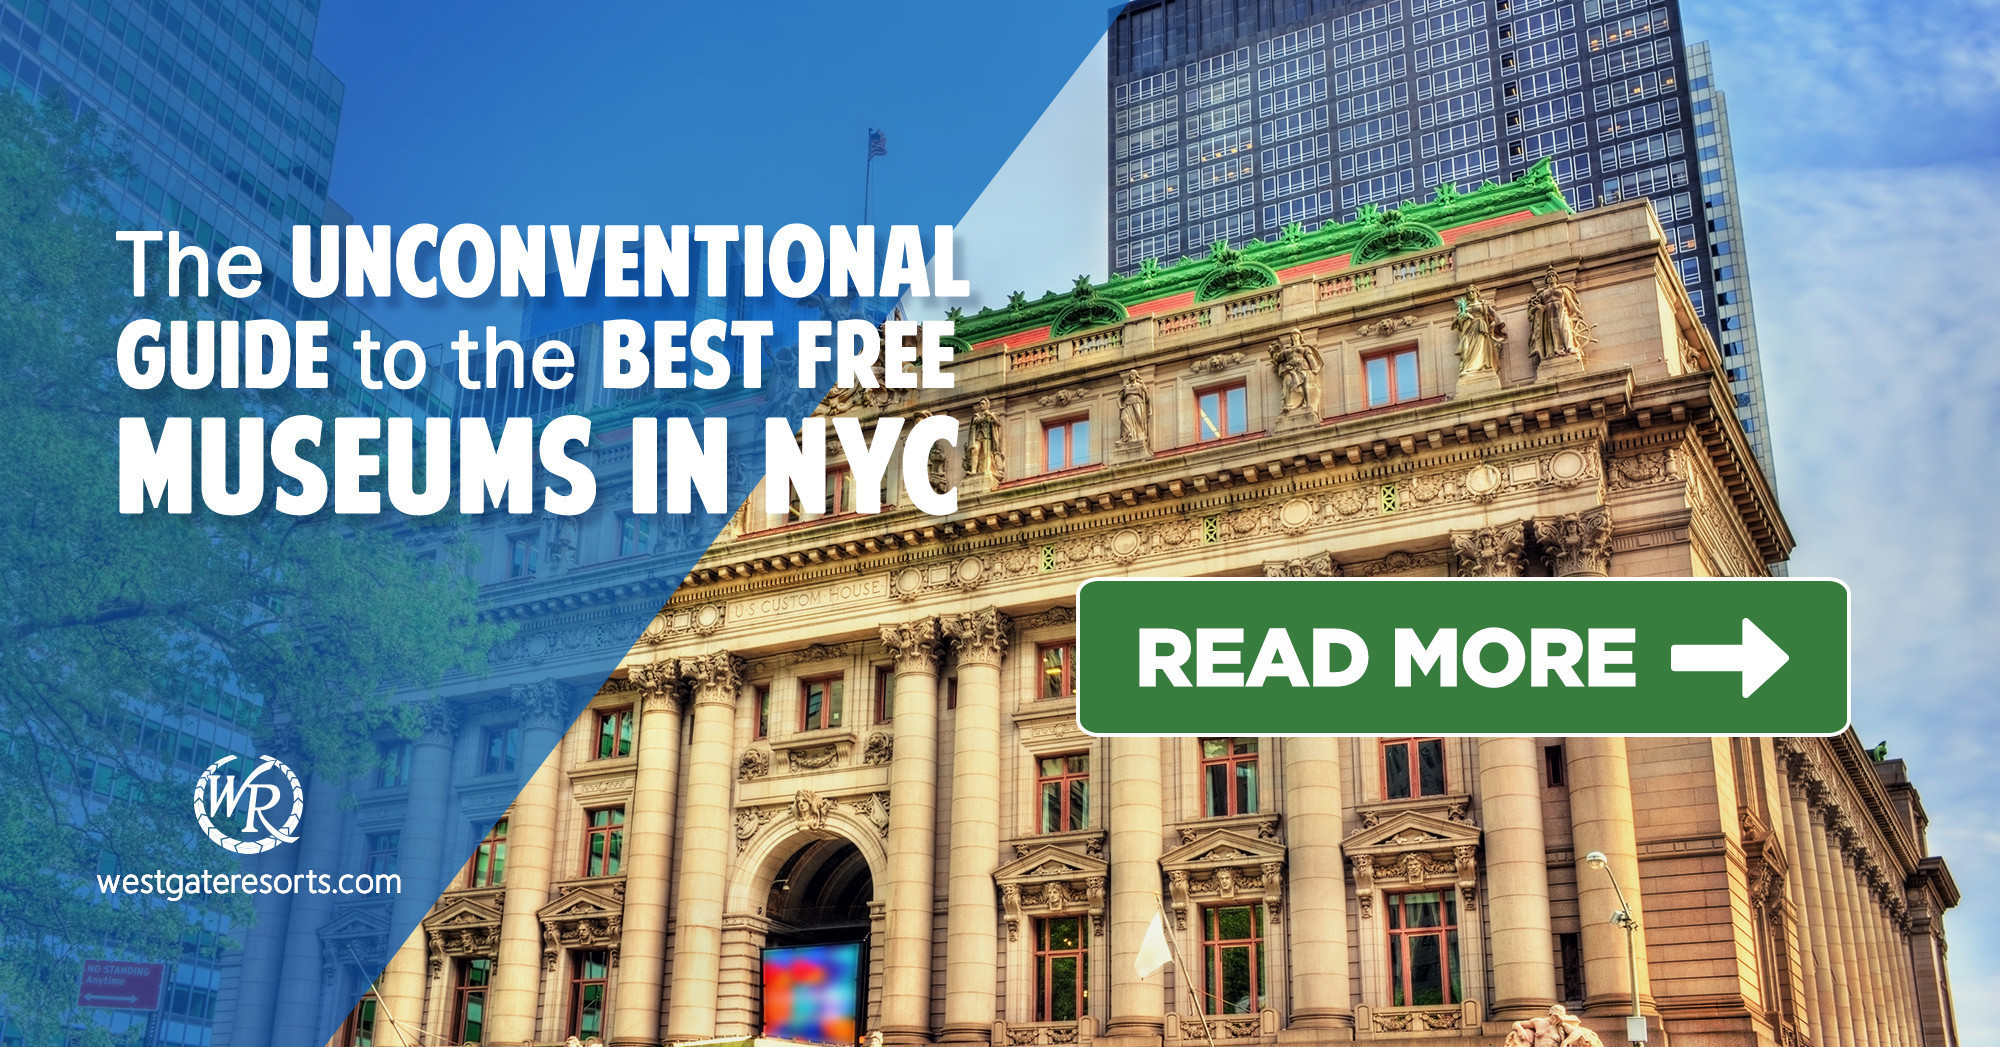 The Unconventional Guide to the Best Free Museums in NYC | New York City Museums Guide | Westgate NYC